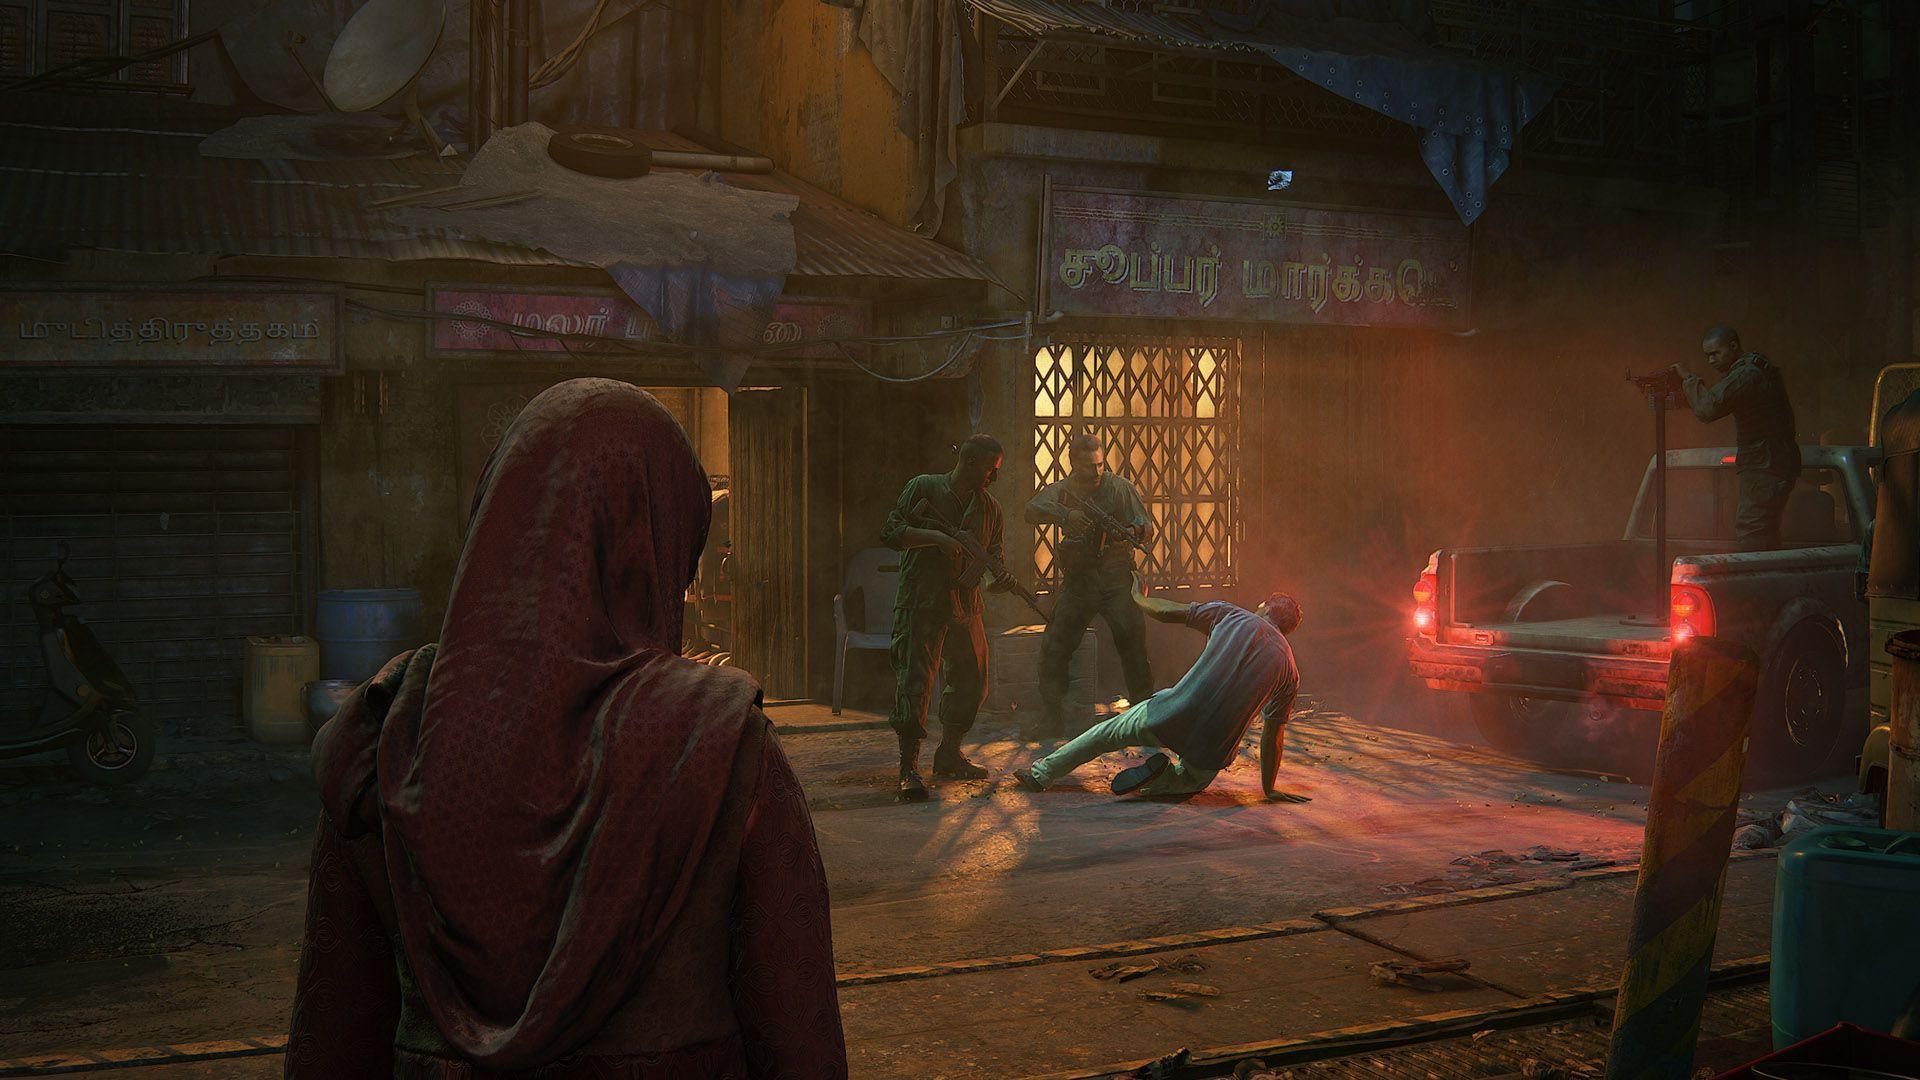 Uncharted: The Lost Legacy is coming from Naughty Dog